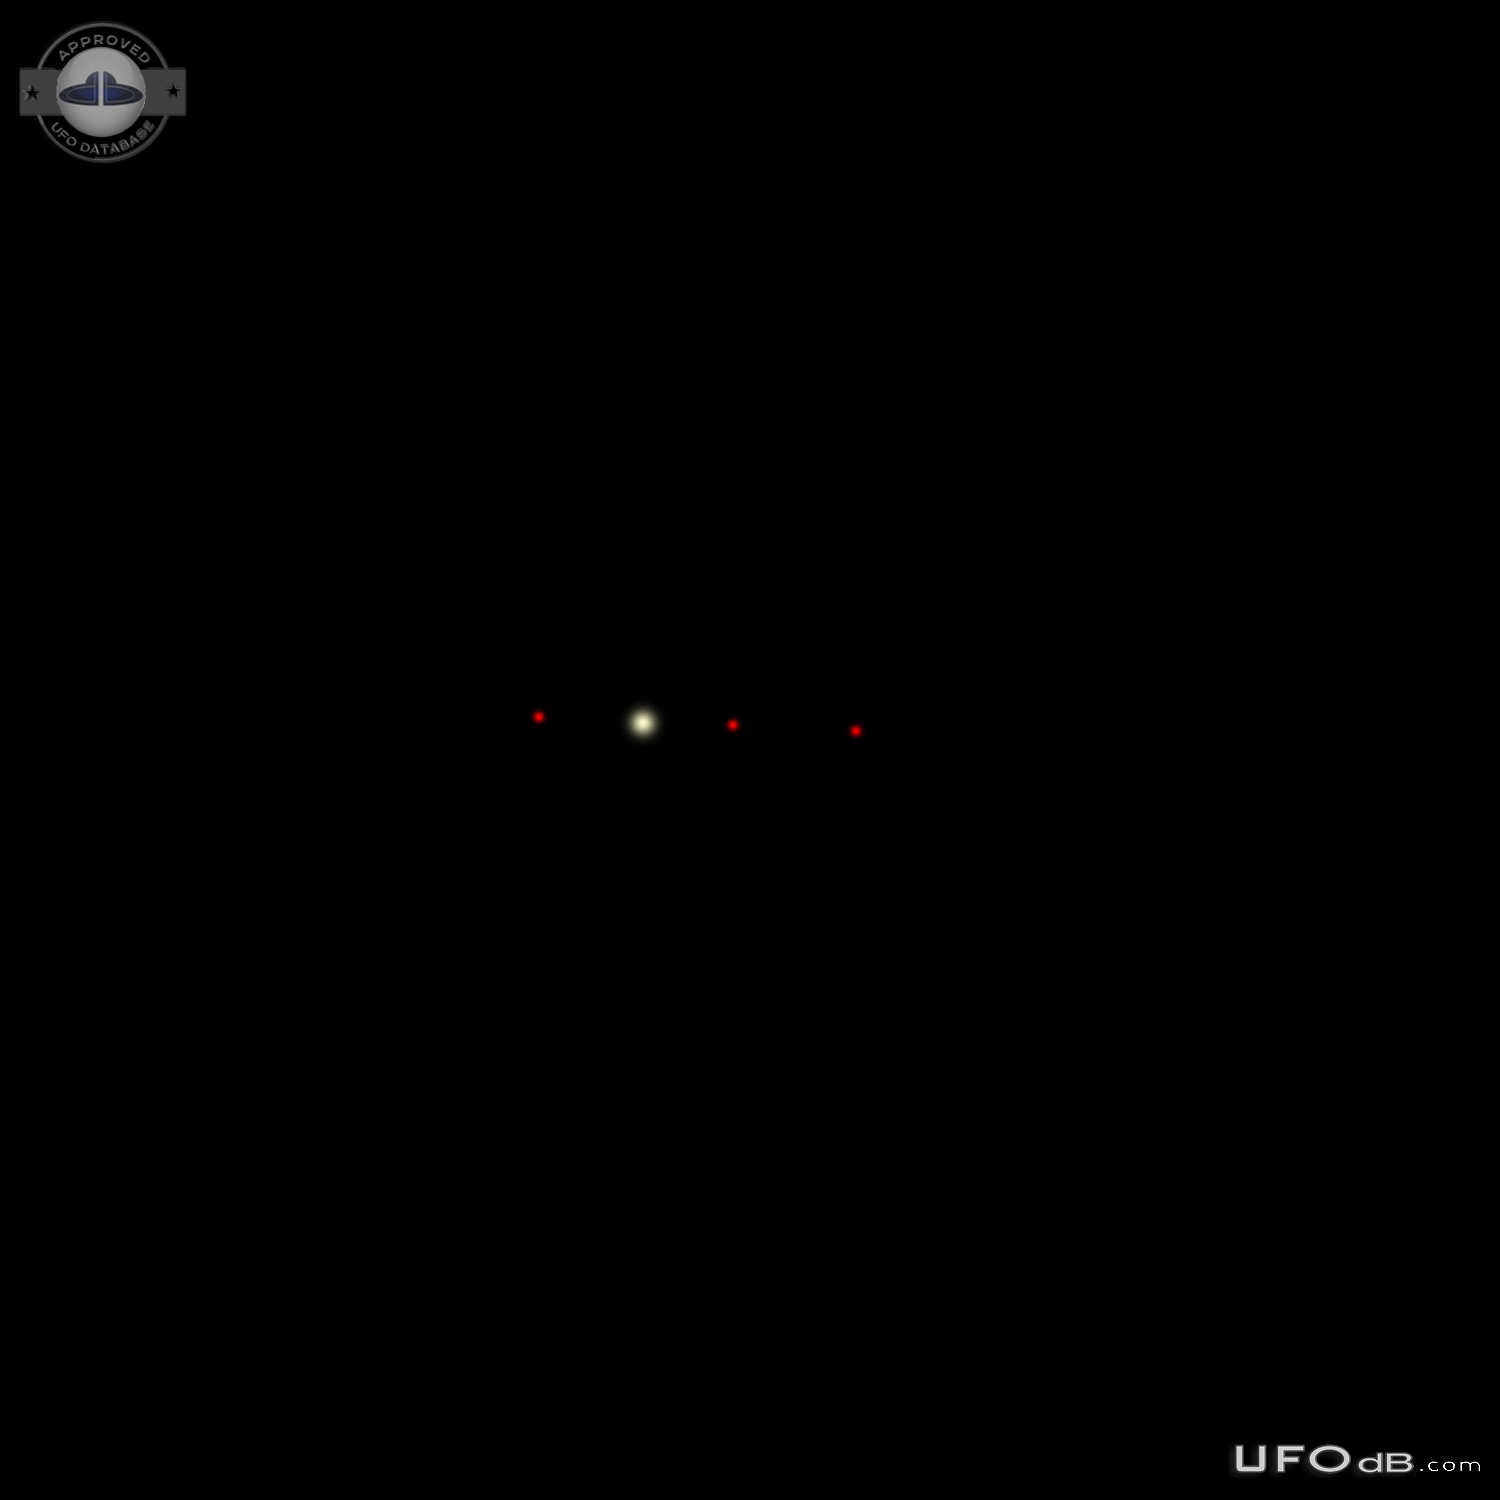 Silent object being followed by jet - Norwich Norfolk England 2015 UFO Picture #763-1